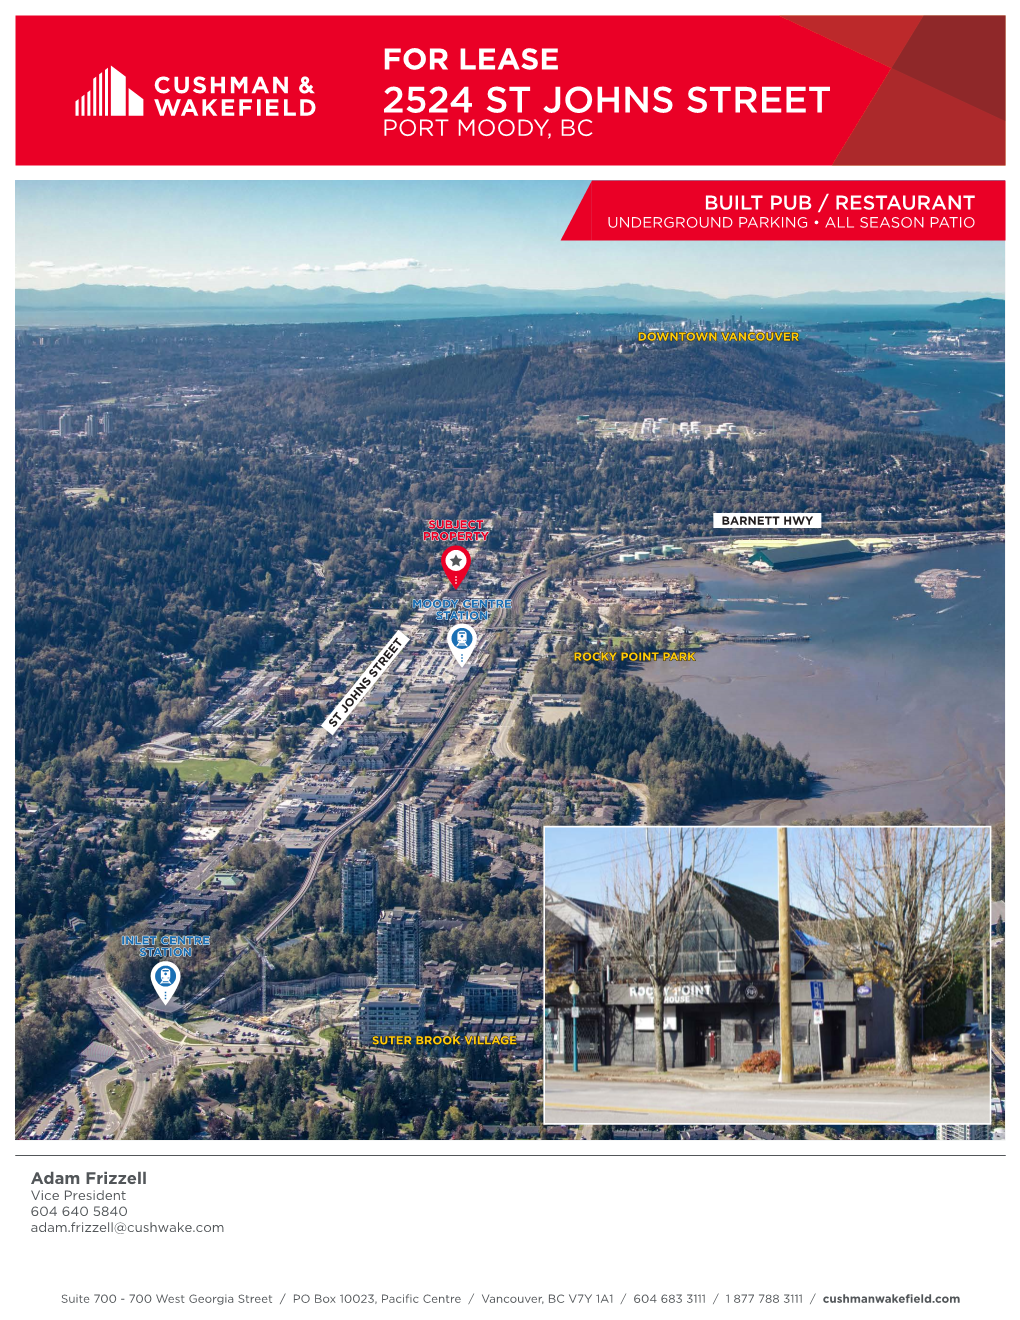 For Lease 2524 St Johns Street Port Moody, Bc